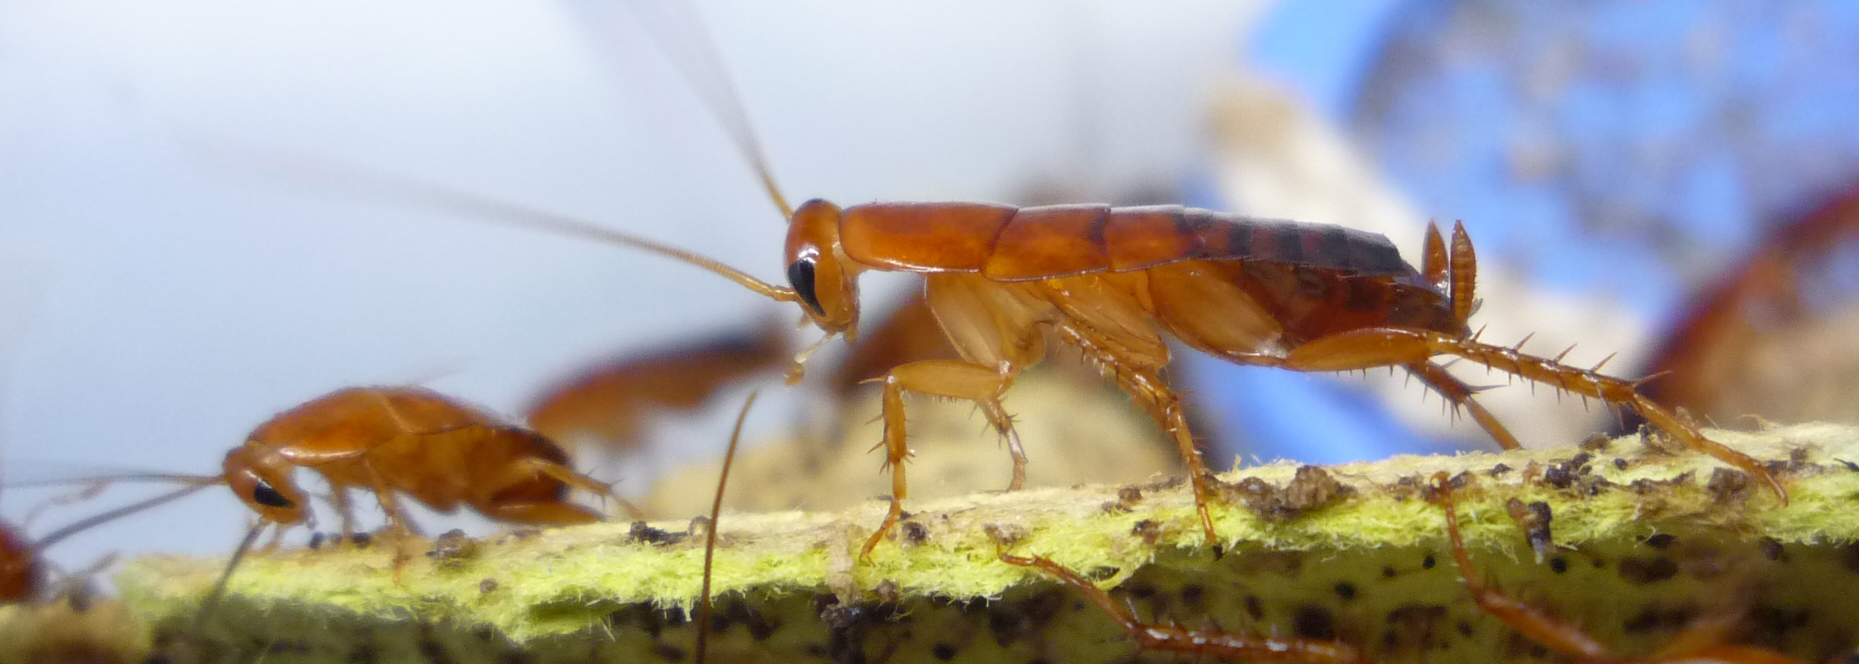 Microsensors in the gut of insects